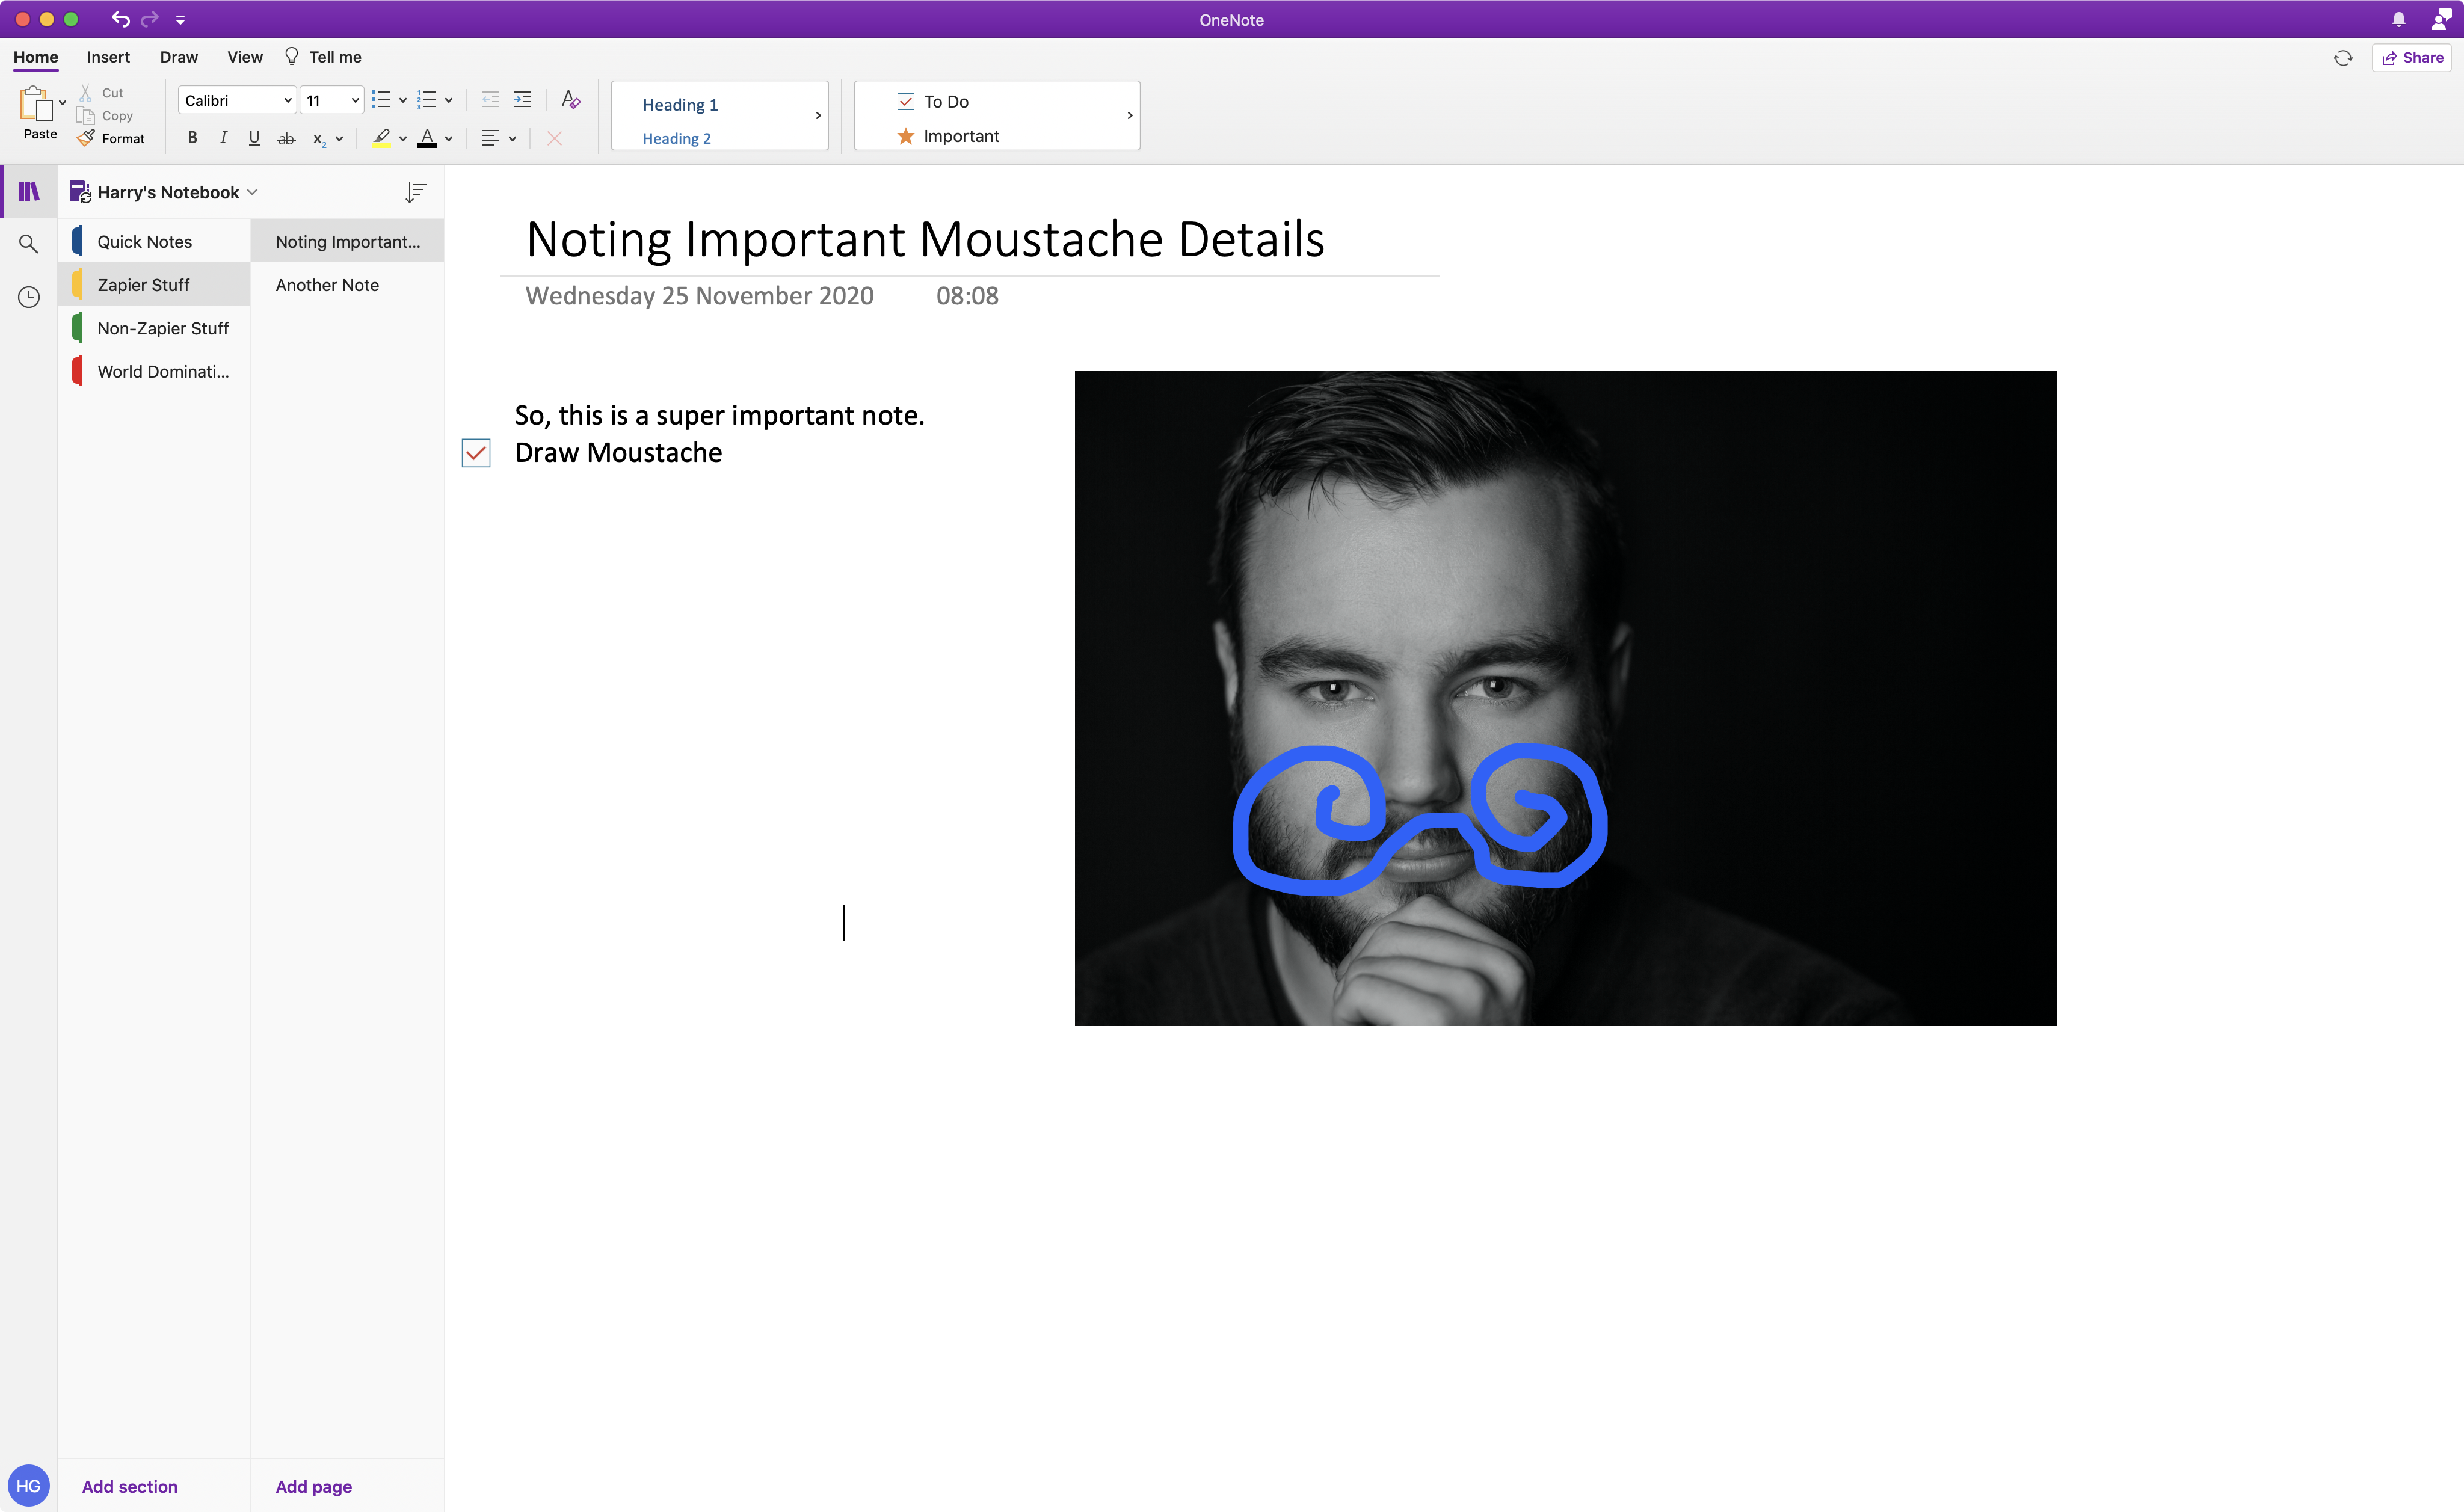 onenote web permissions for onedrive on mac